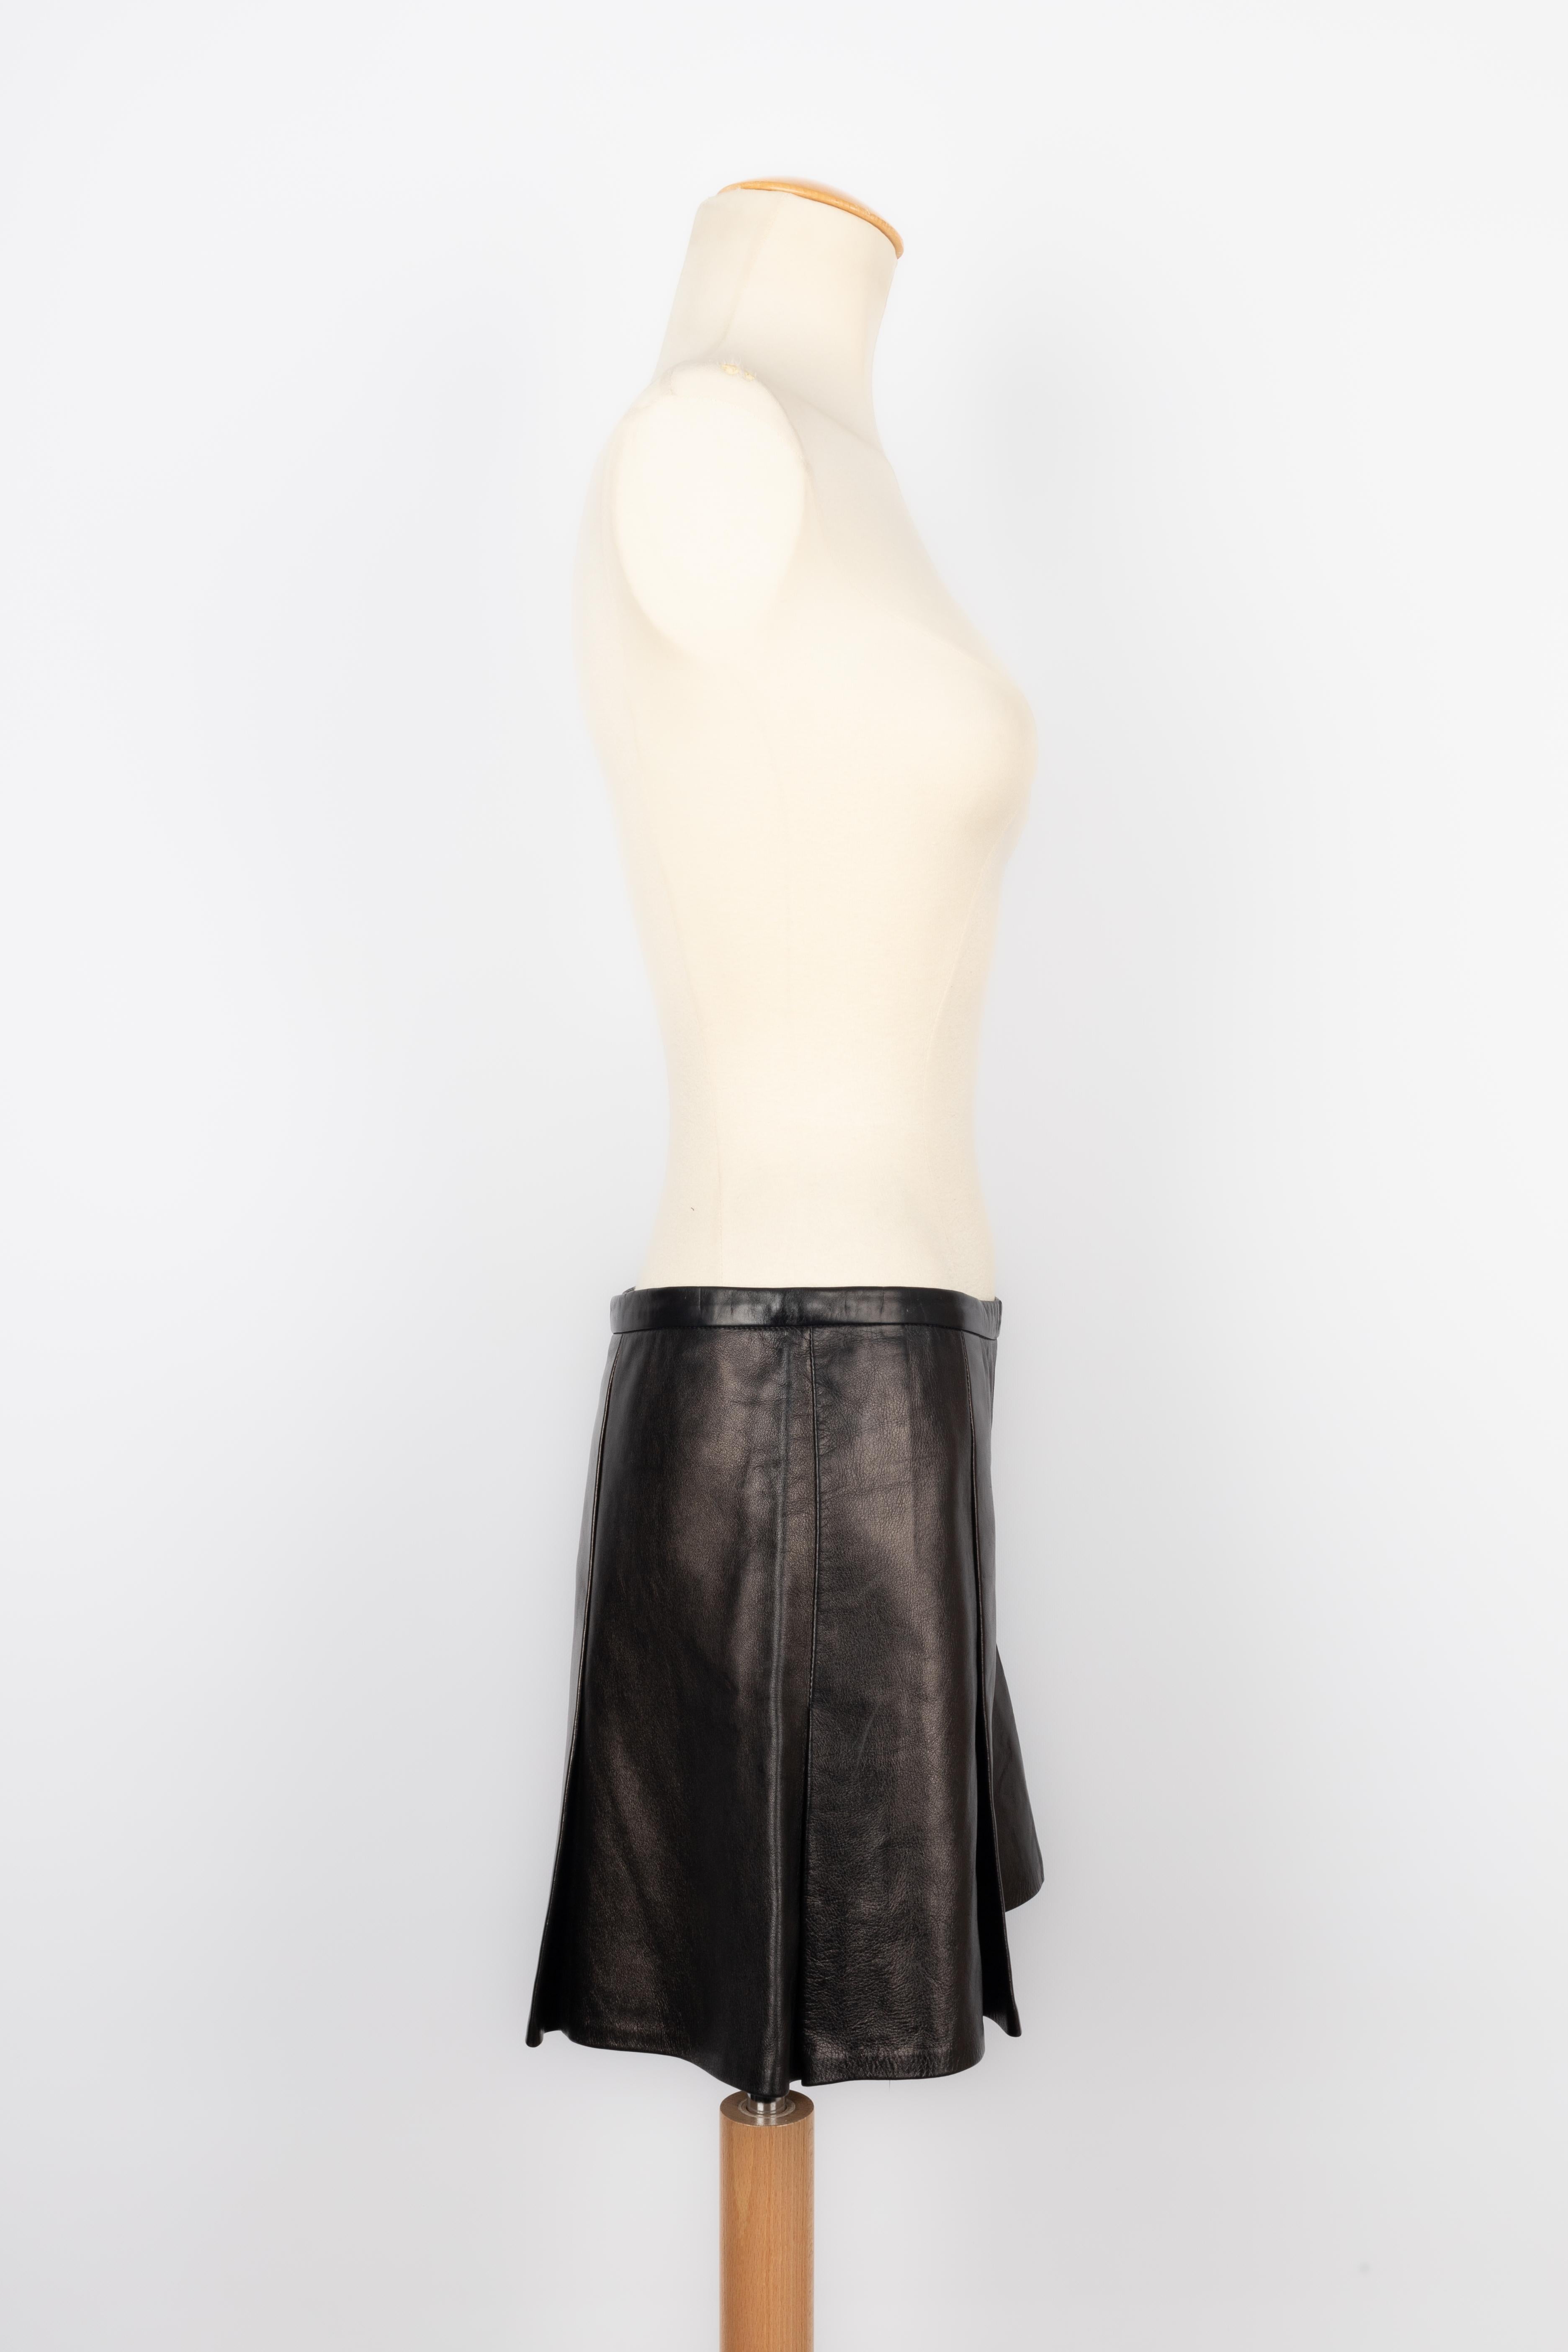 PUCCI - (Made in Italy) Black lamb leather shorts. Size 38FR.

Condition:
Very good condition

Dimensions:
Waist: 38 cm - Length: 36 cm

FJ91